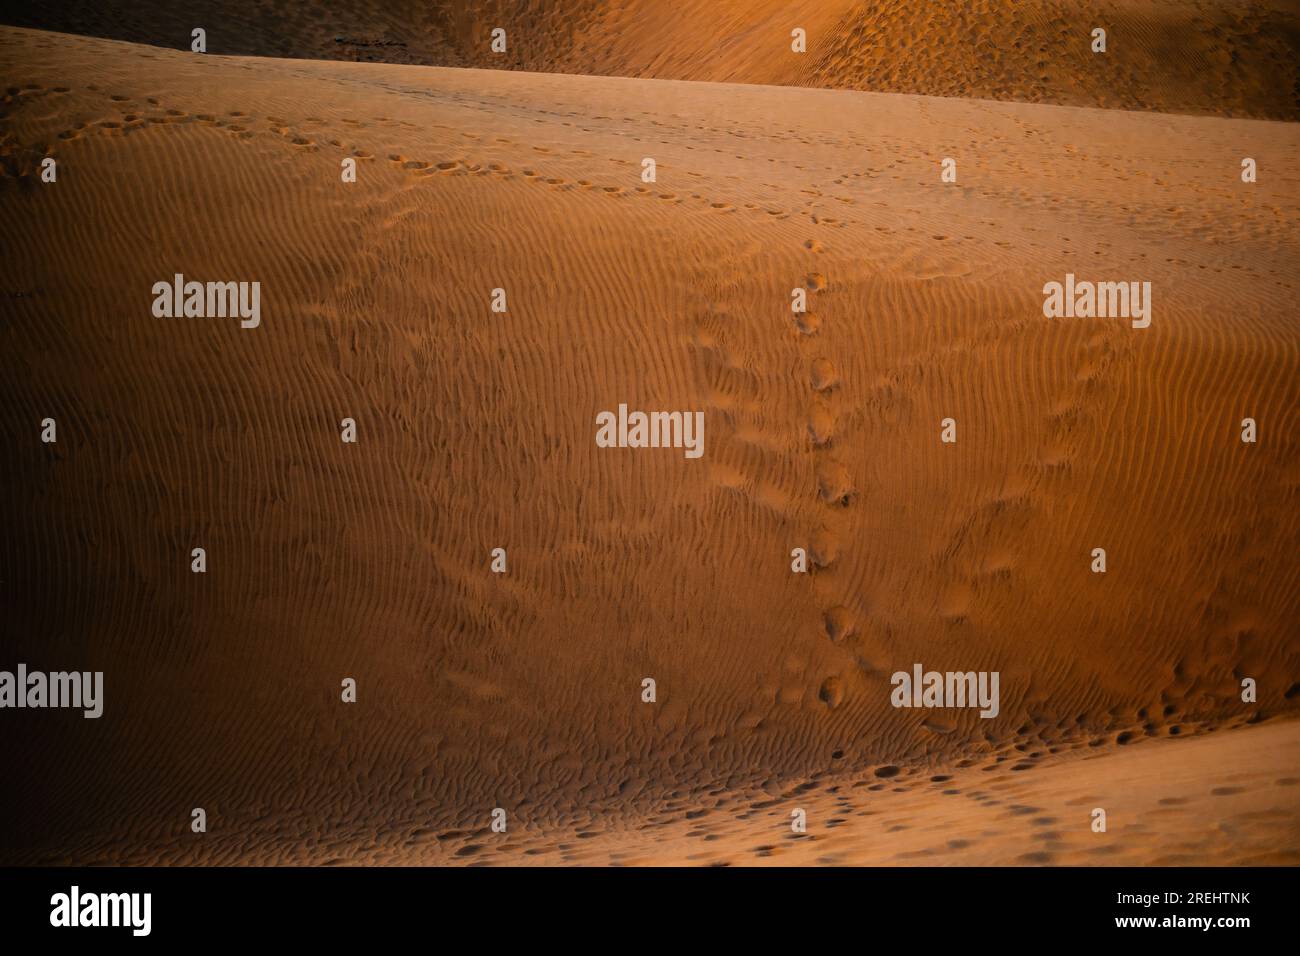 Foot print patterns on a dune in the desert of Africa. Stock Photo